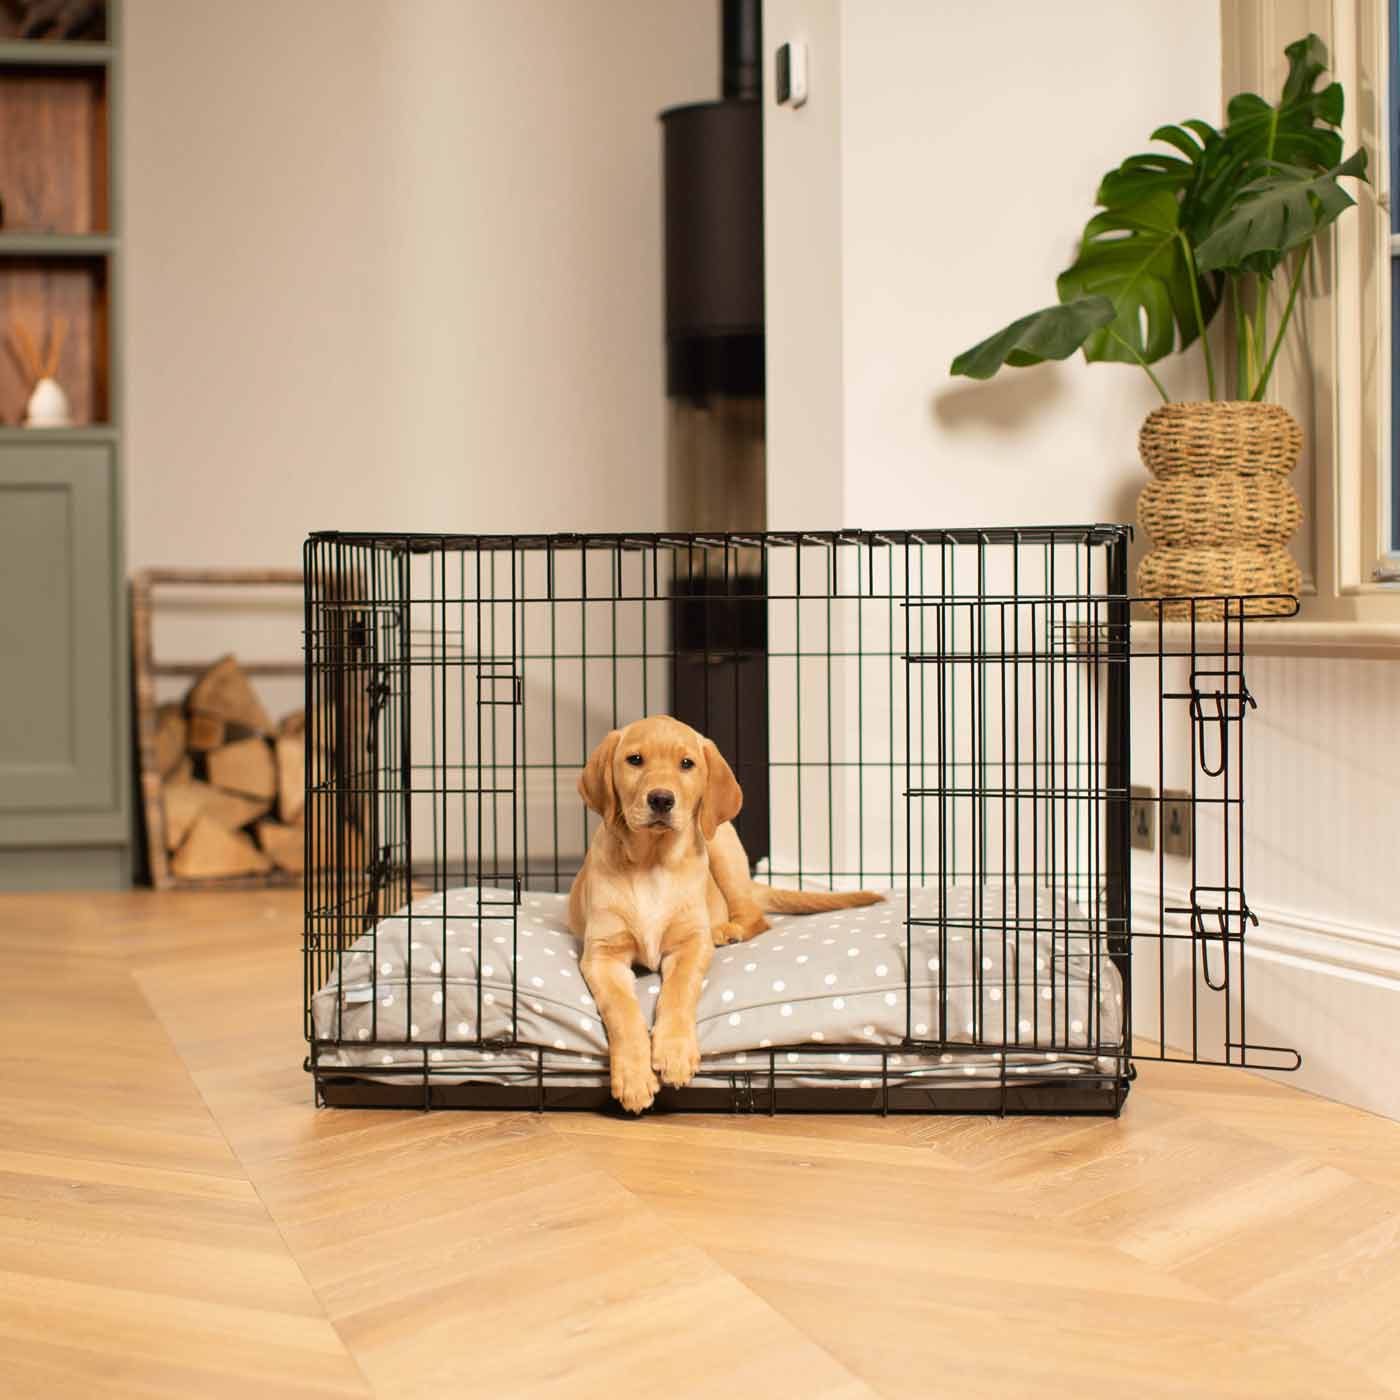 Luxury Dog Cage Cushion, Grey Spot Cage Cushion The Perfect Dog Cage Accessory, Available To Personalize Now at Lords & Labradors US